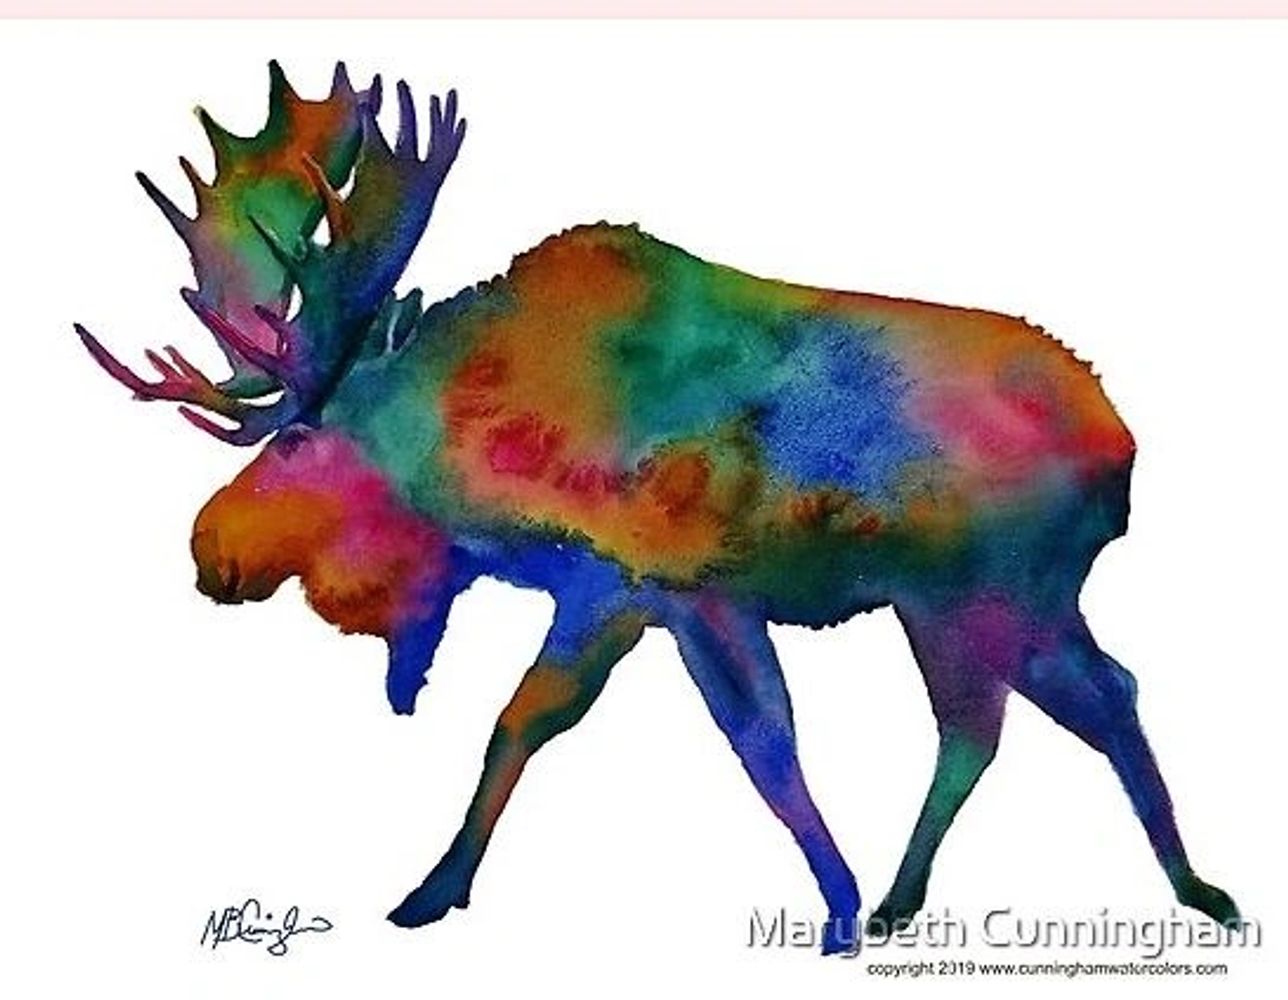 Watercolor painting of a moose in bright colors